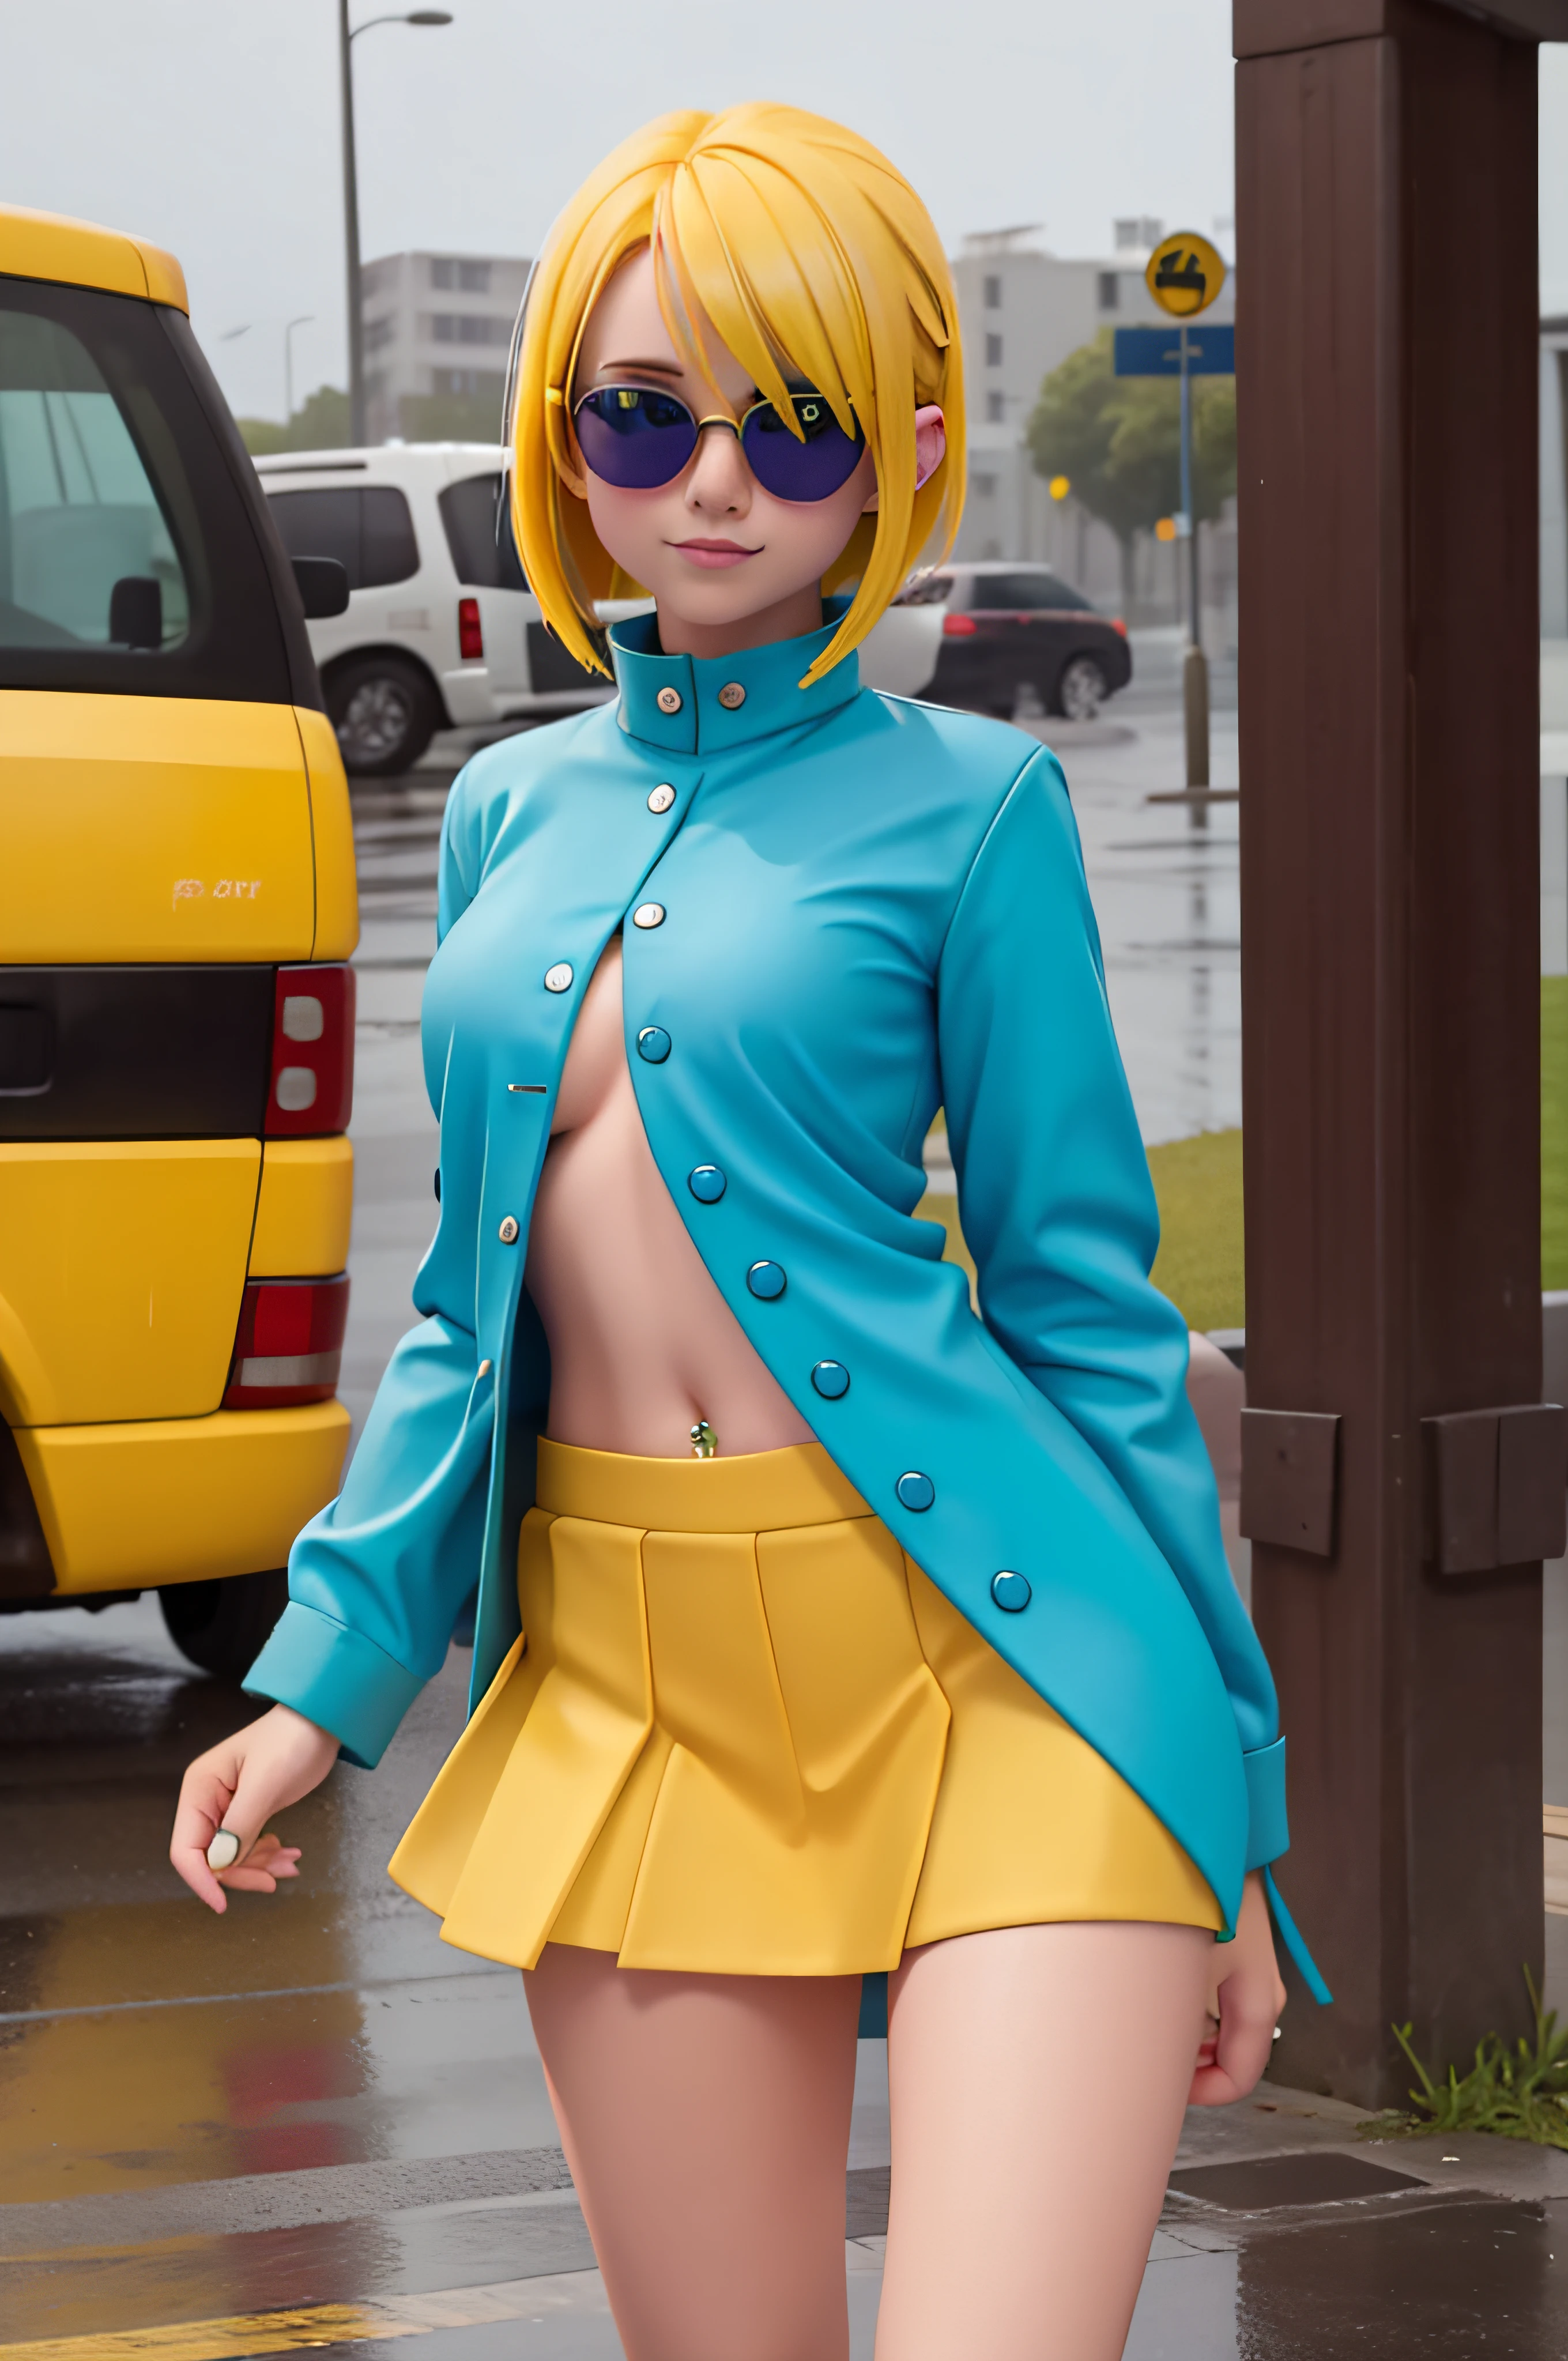 1 girl, 20 years old, yellow hair with blue highlights, green baby look, blue miniskirt, navel piercing, sunglasses, in the rain